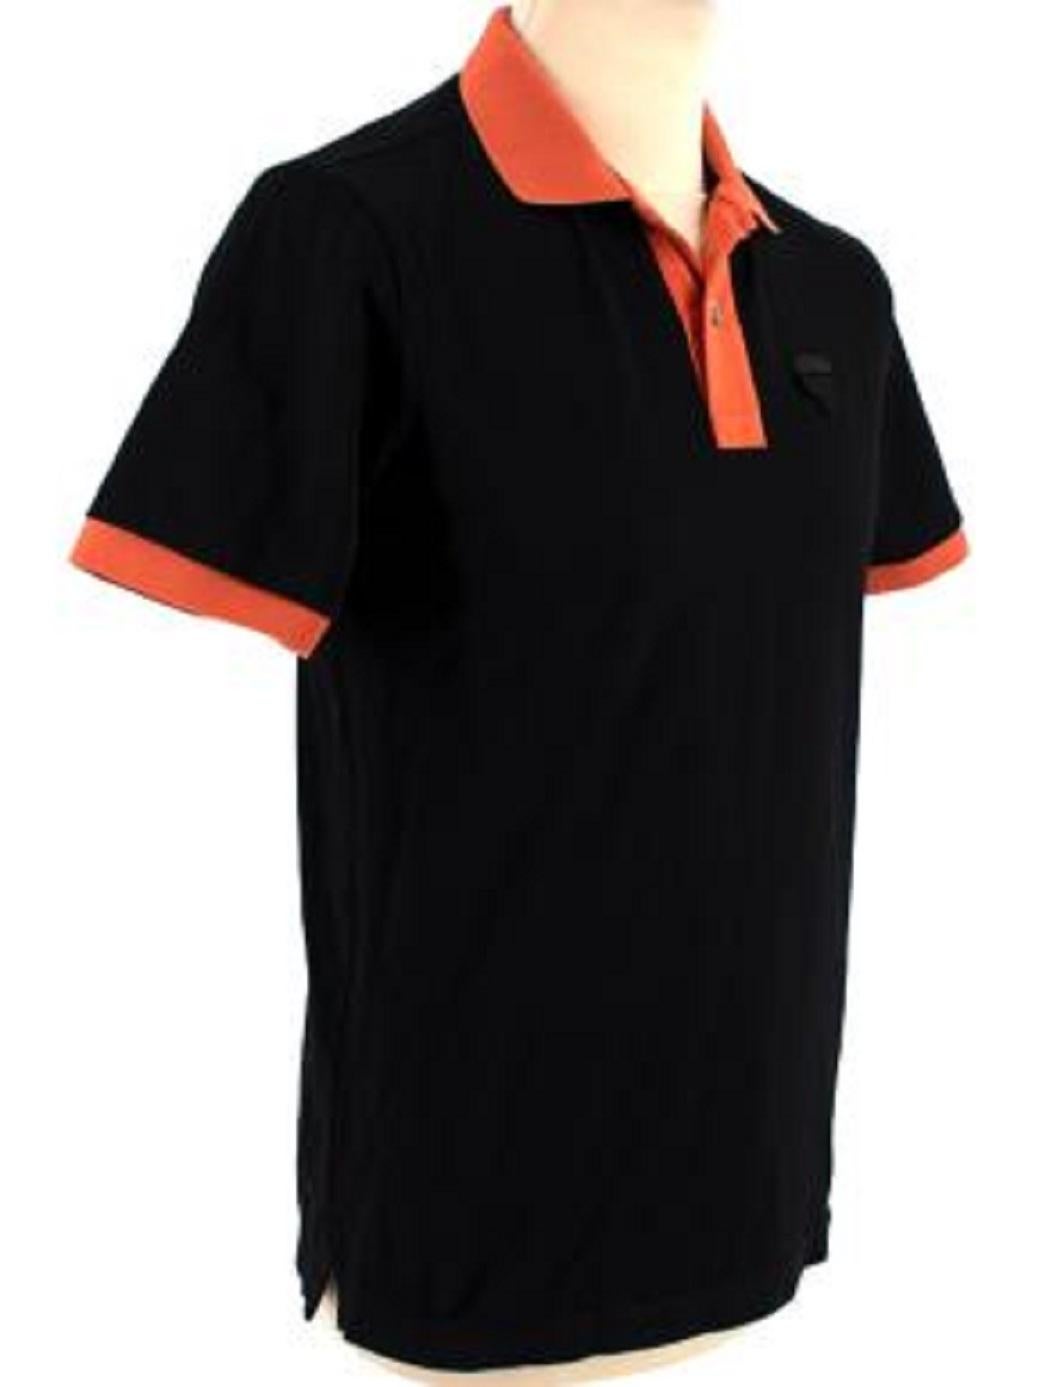 Prada Black & Orange Cotton Polo Shirt

- Two-button fastening
- Logo patch on chest
- Orange collar and cuffs
- Ribbed collar and cuffs

Material
100% Cotton

Made in Romania

9.5/10 Excellent condition

PLEASE NOTE, THESE ITEMS ARE PRE-OWNED AND